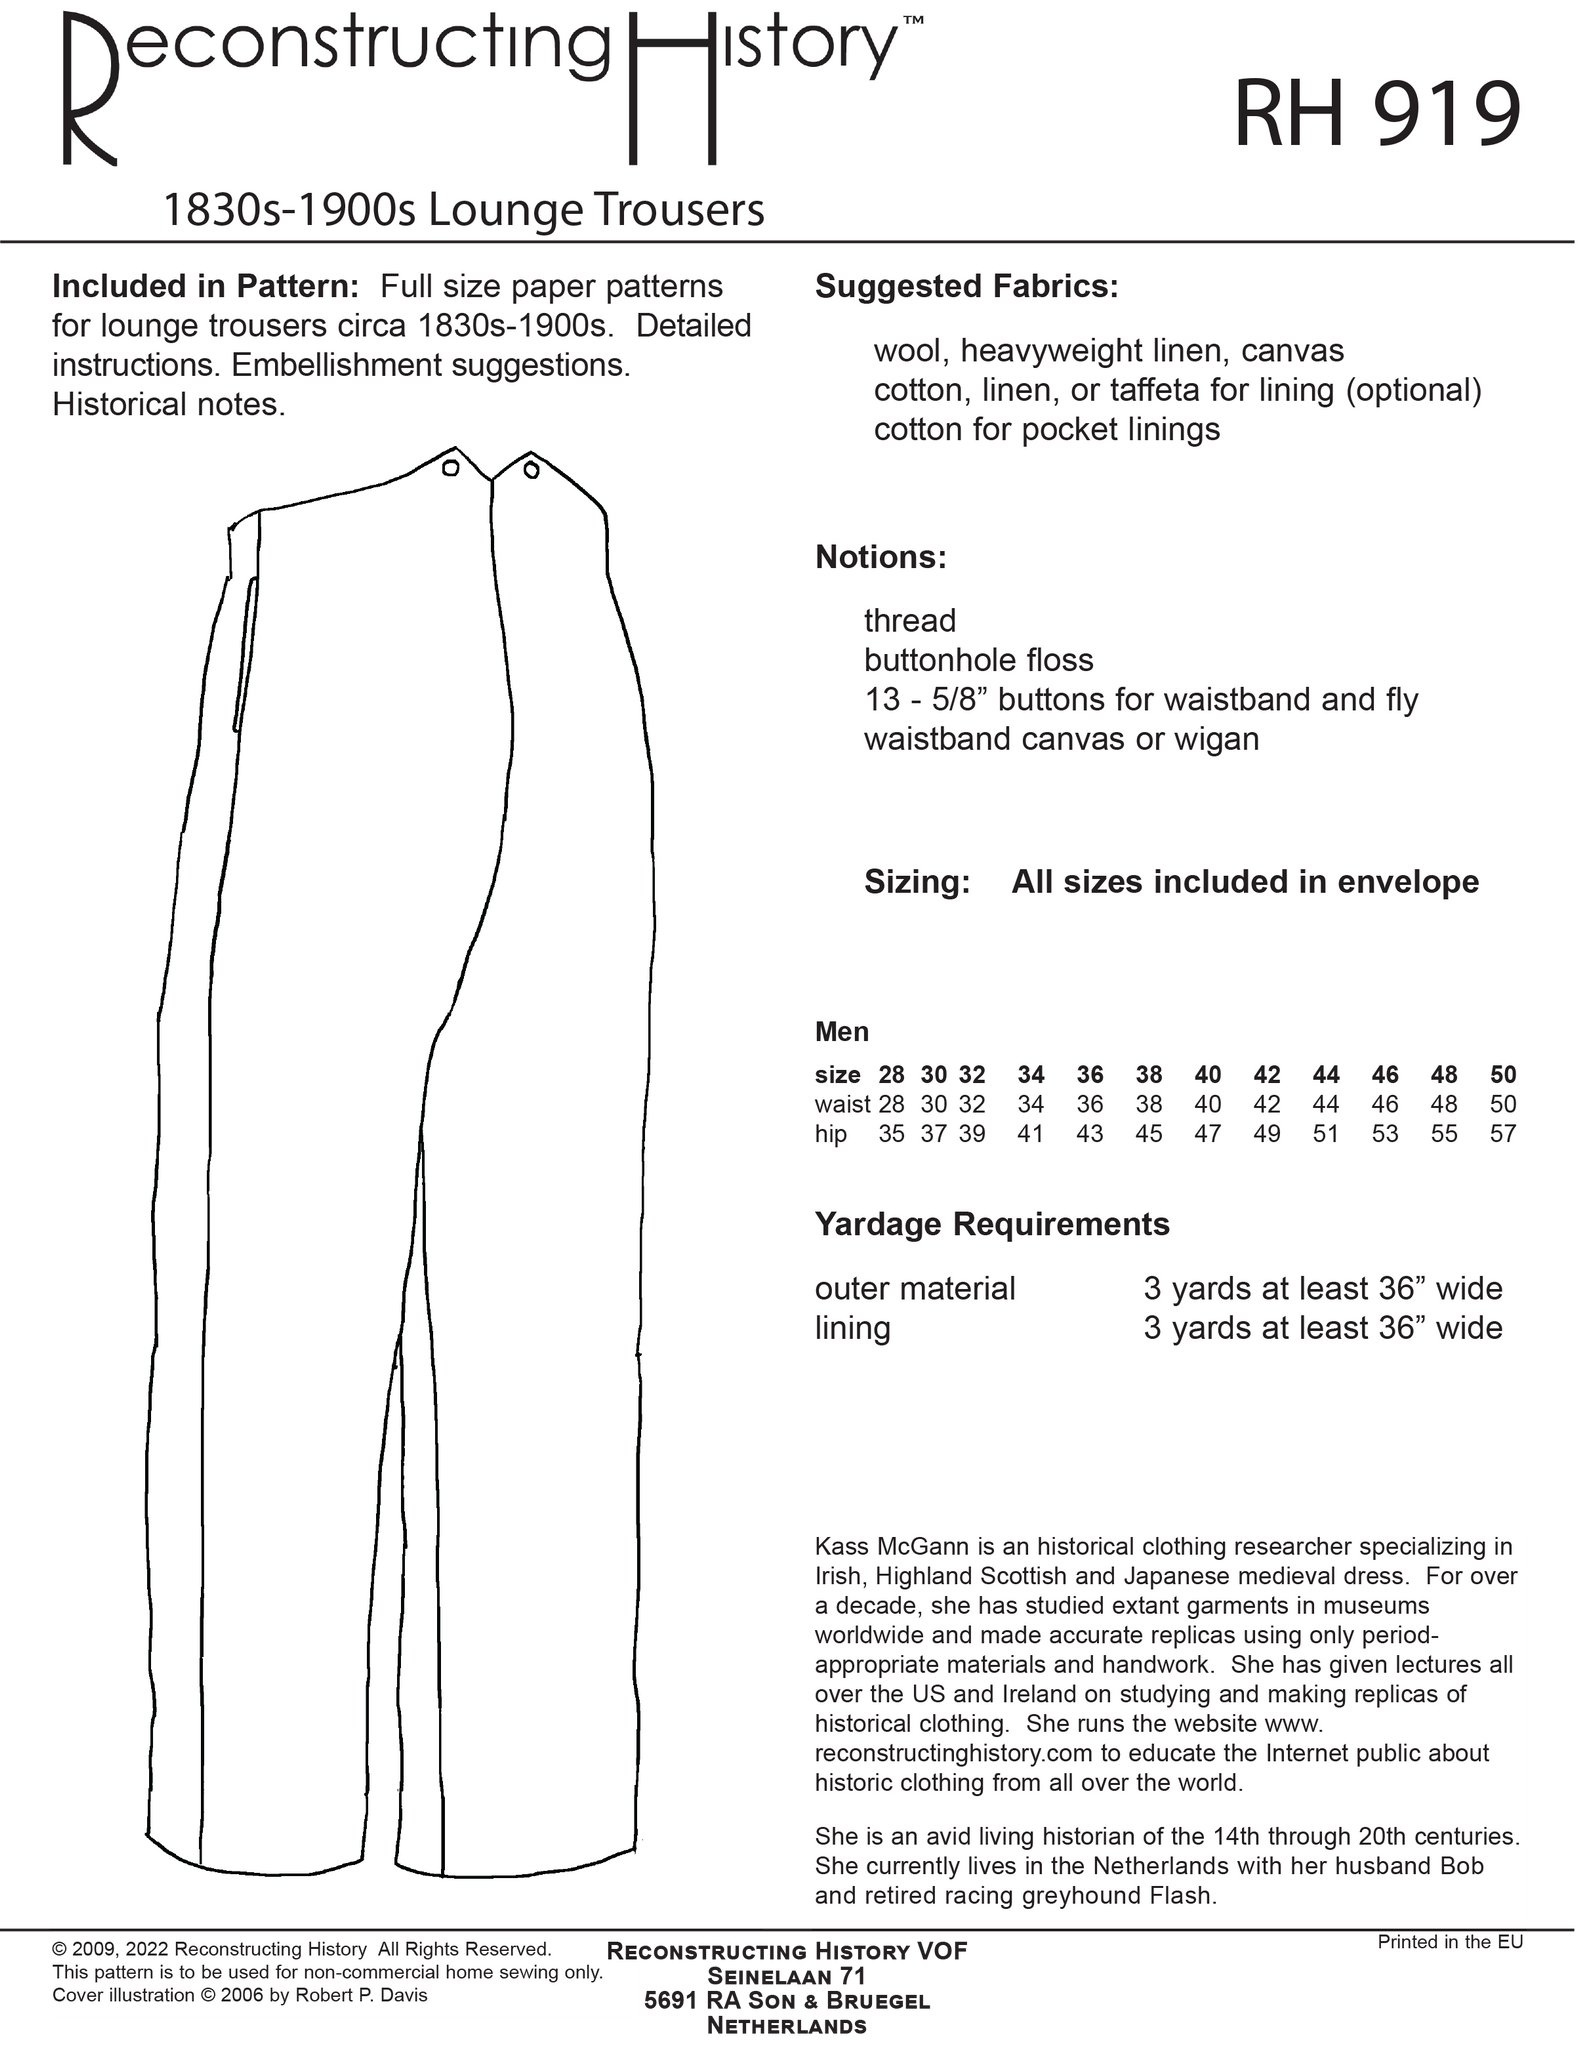 The history of pants (or trousers)